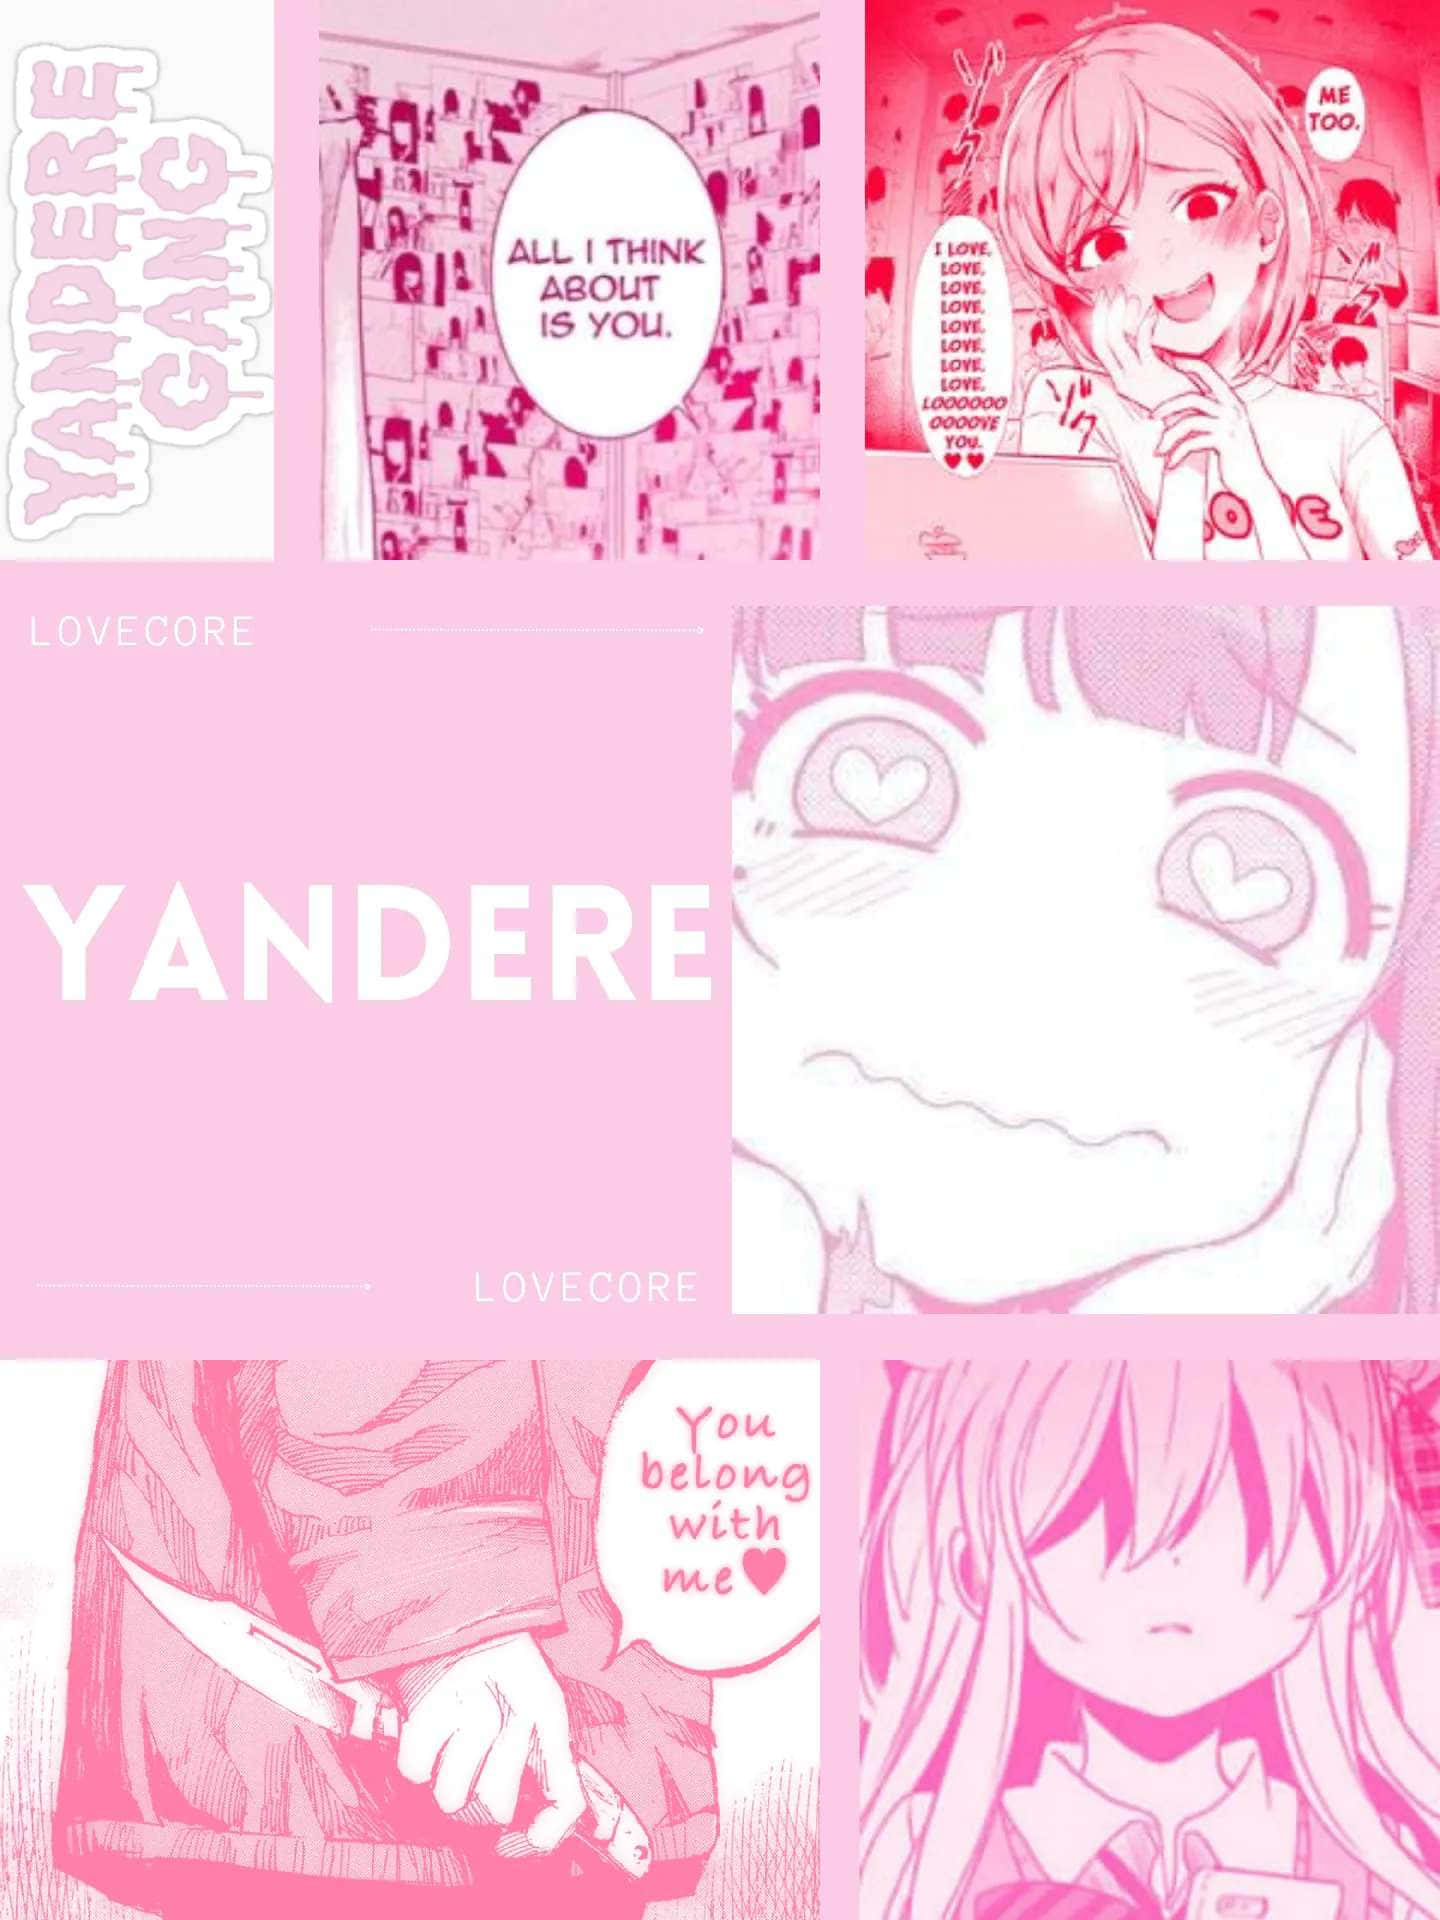 Lovecore Yandere Collage Pink Aesthetic.jpg Background